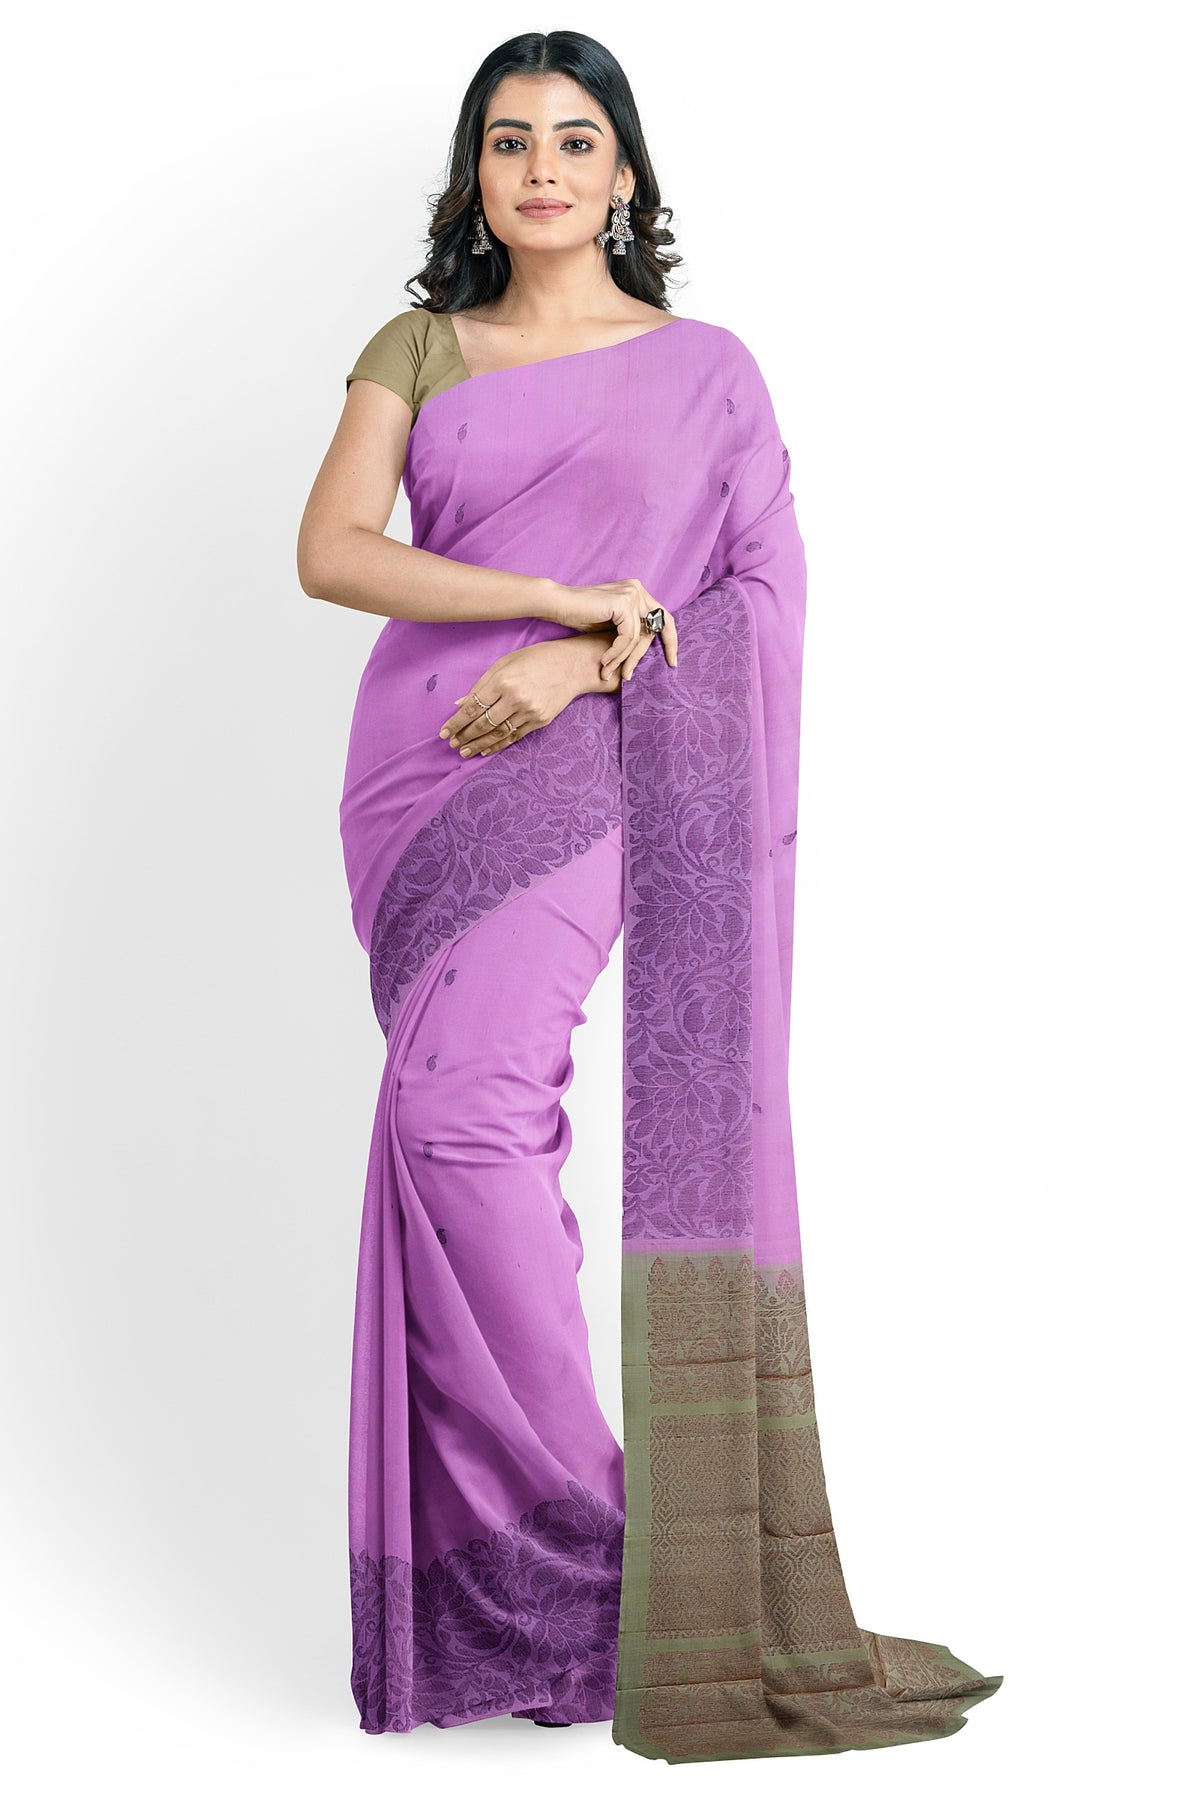 United Classic Hot Pink Saree Shapewear With Side Slits